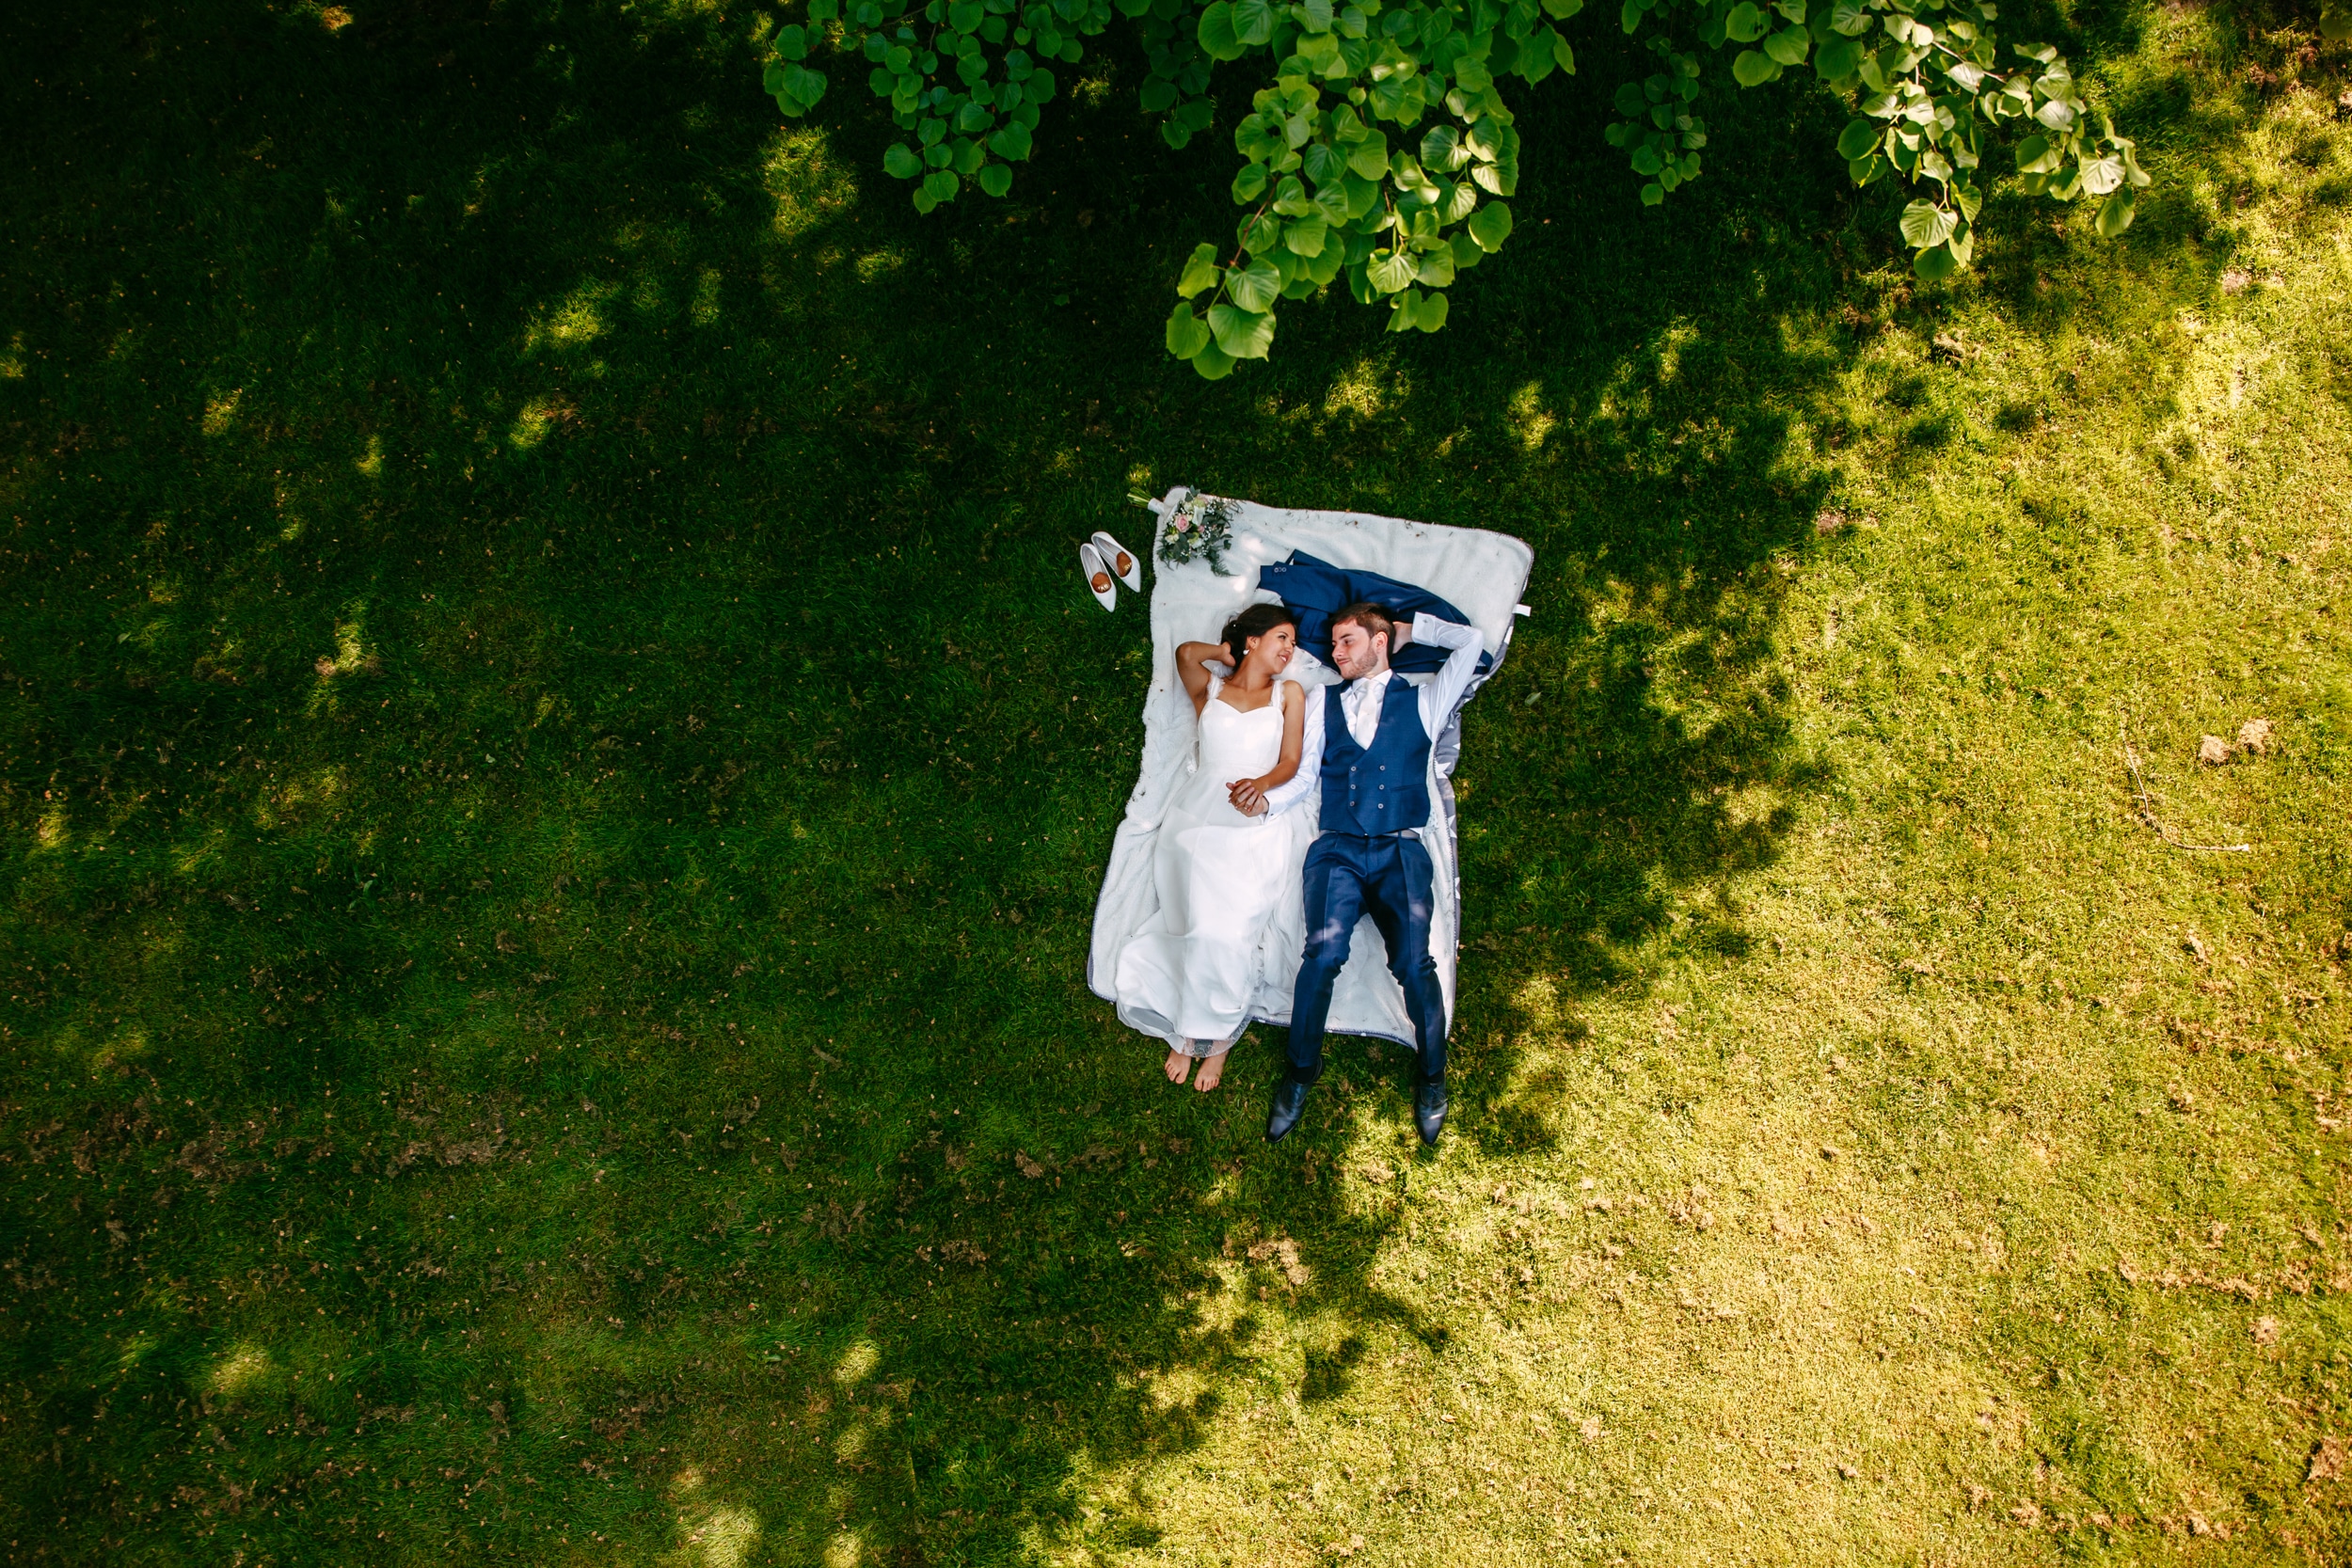 A relaxed bride and groom lying on the grass during their wedding.